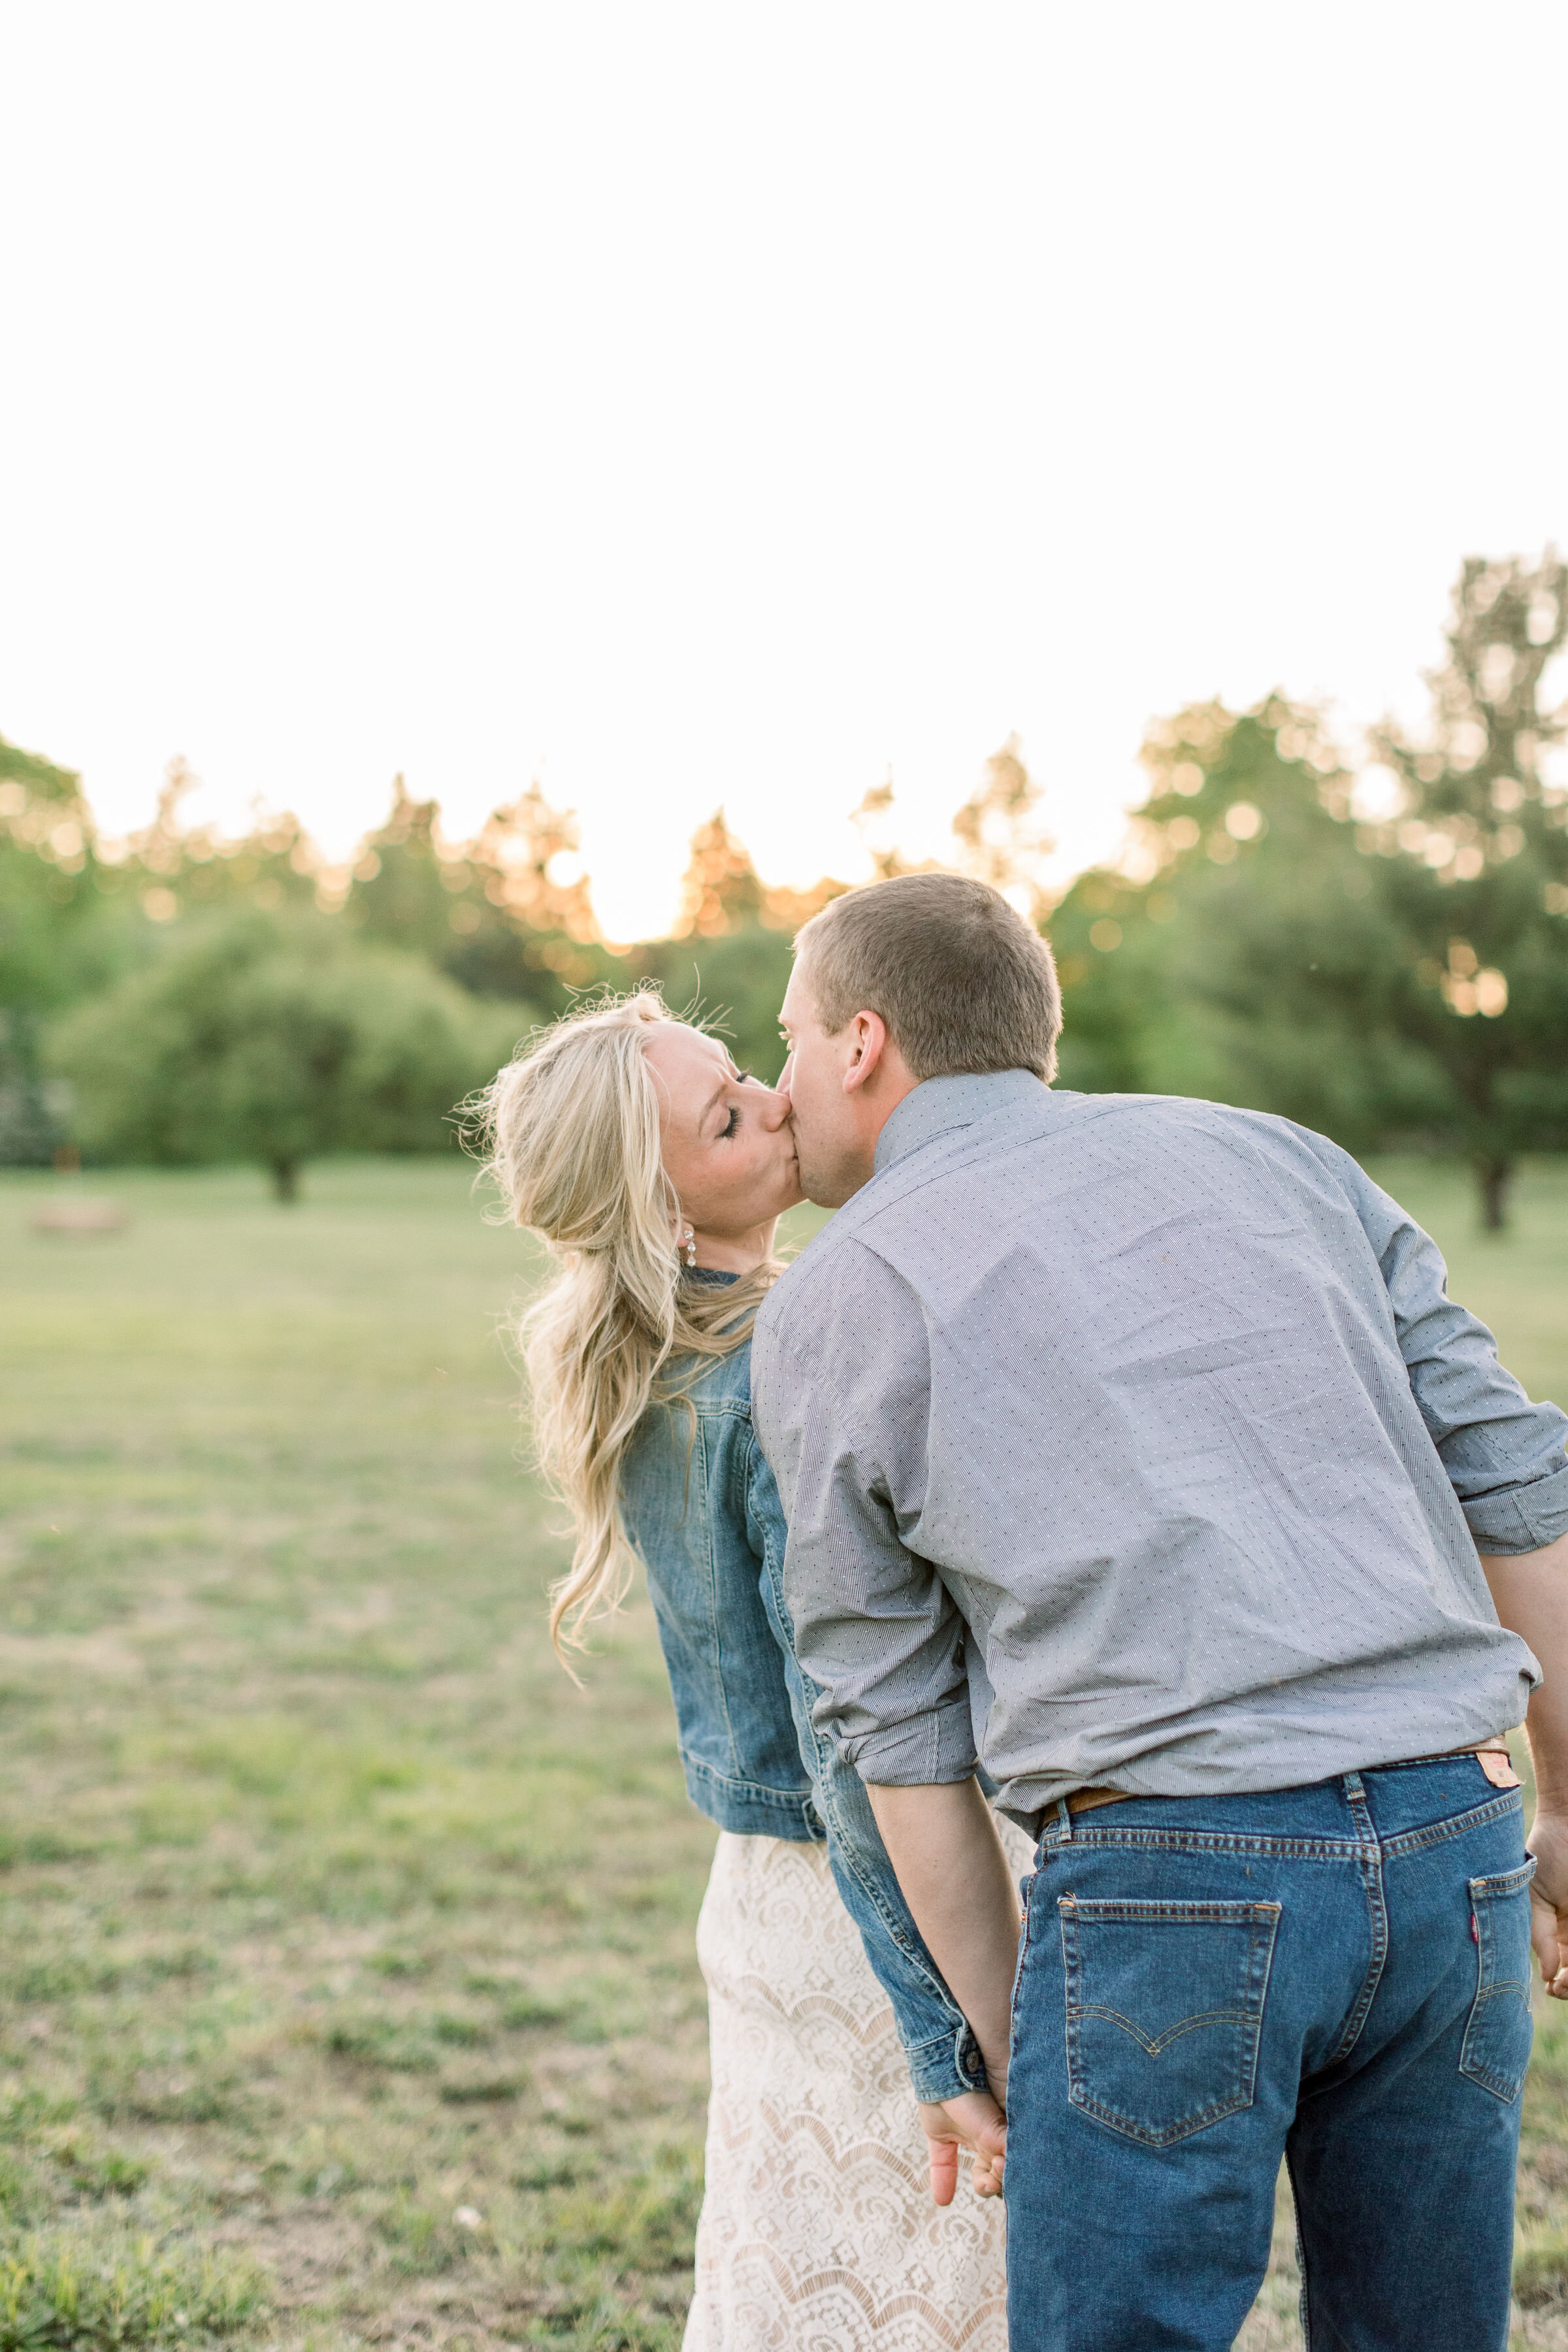  Ottawa, Canada engagement photographer, Chelsea Mason Photography captures this couple walking through a grassy field and stopping to kiss. engaged couple holding hands and walking through field Ottawa canned engagement photographer #ChelseaMasonPho